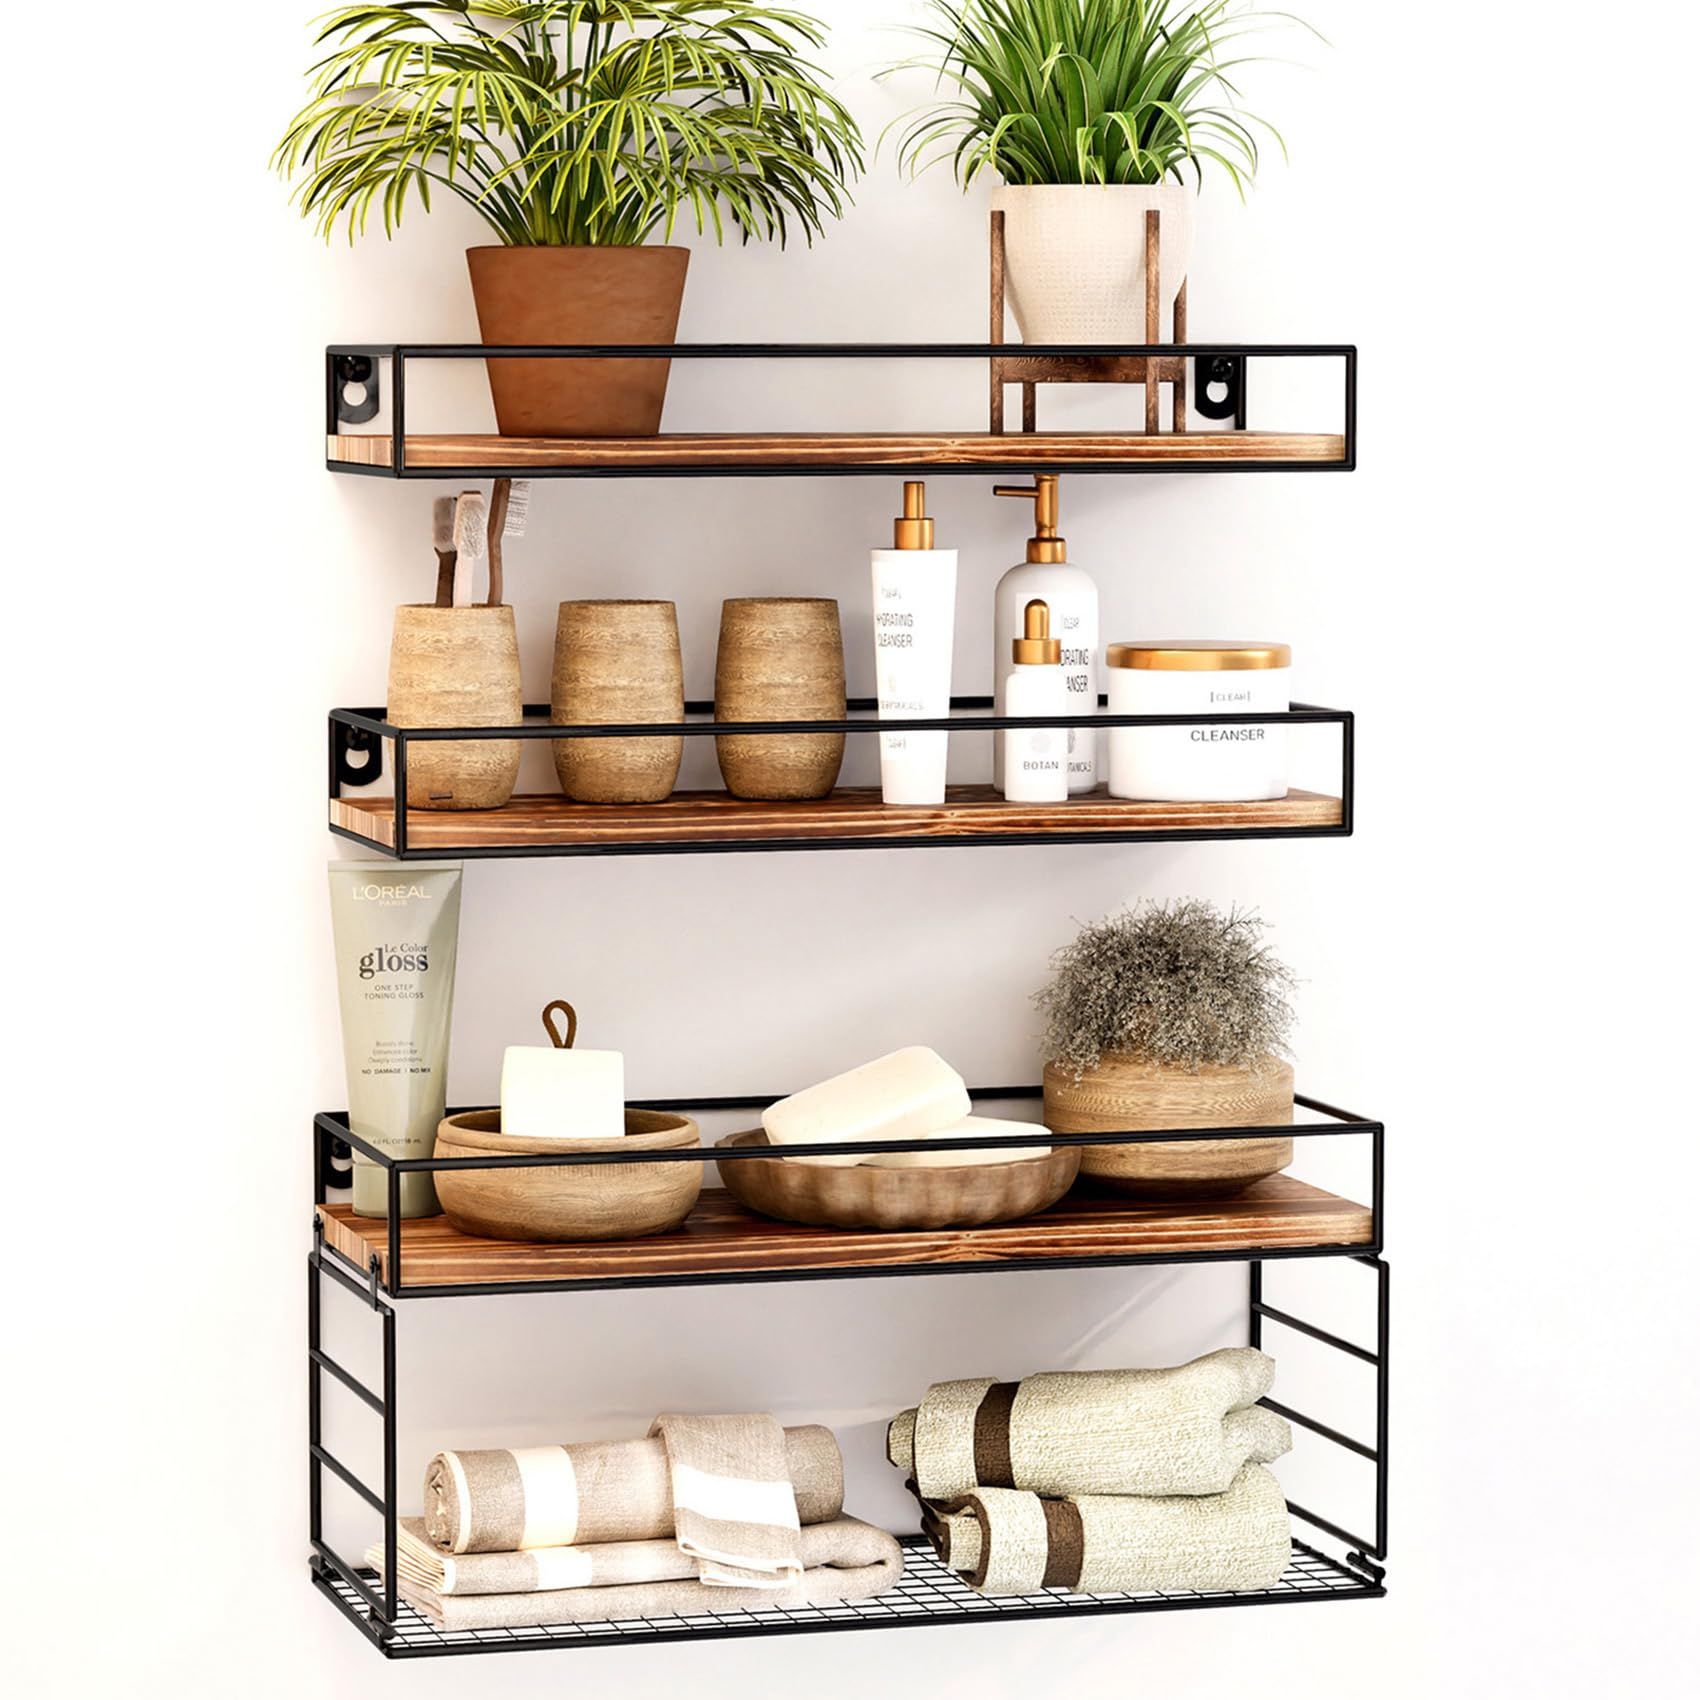 The Perfect Solution for Bathroom Clutter: Organize with Stylish Storage Shelves and Baskets